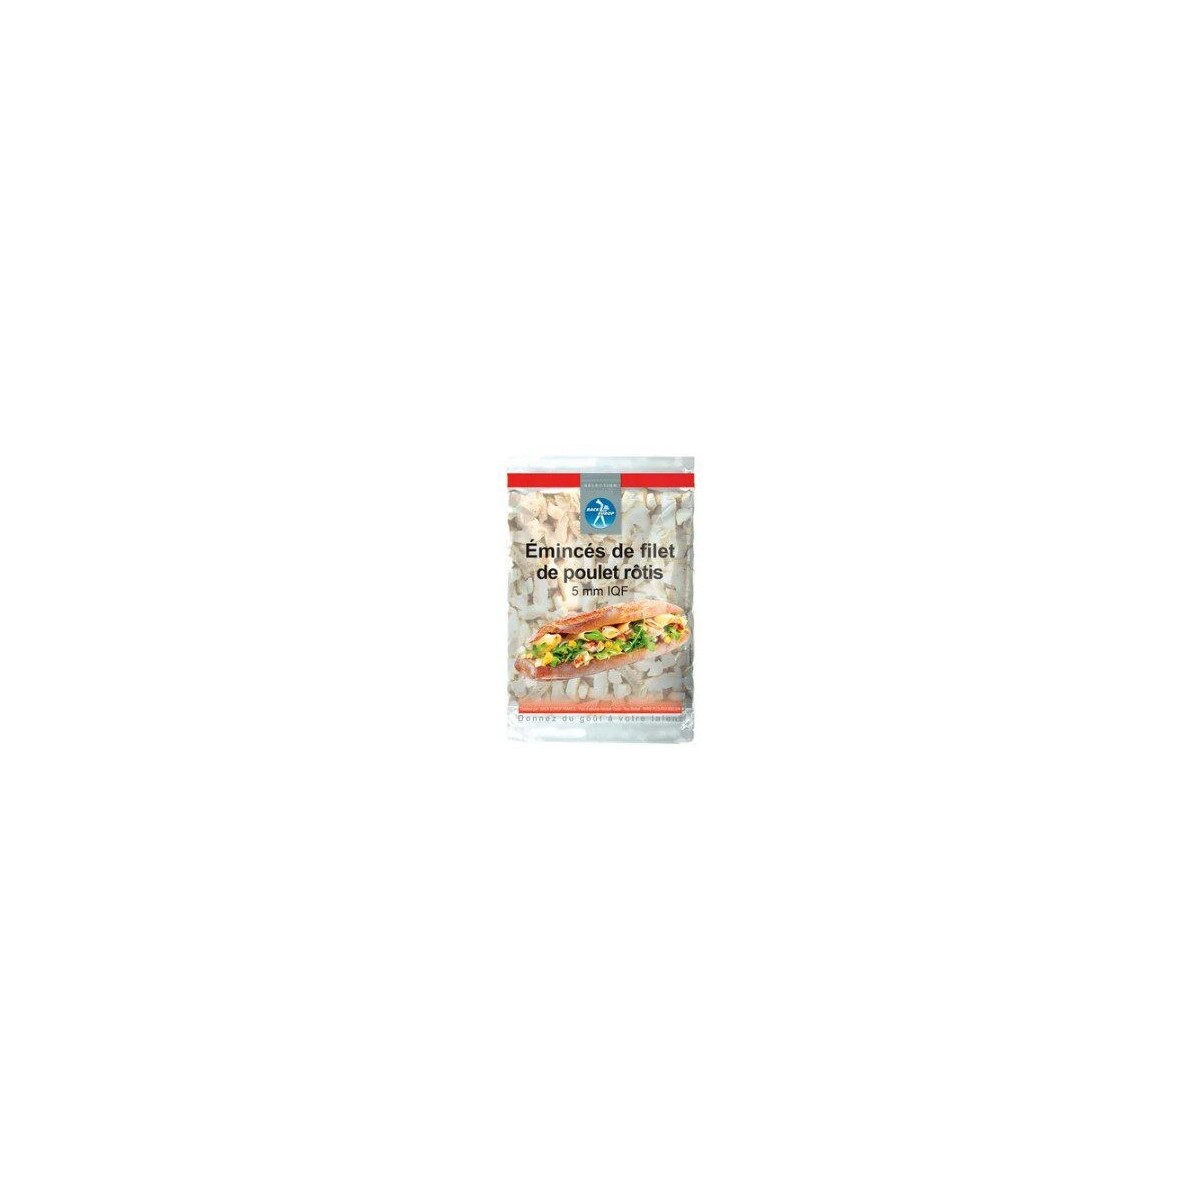 GASTRONOME 571672 ROASTED CHICKEN SLICES 5MM IQF 4X1KG  BAG